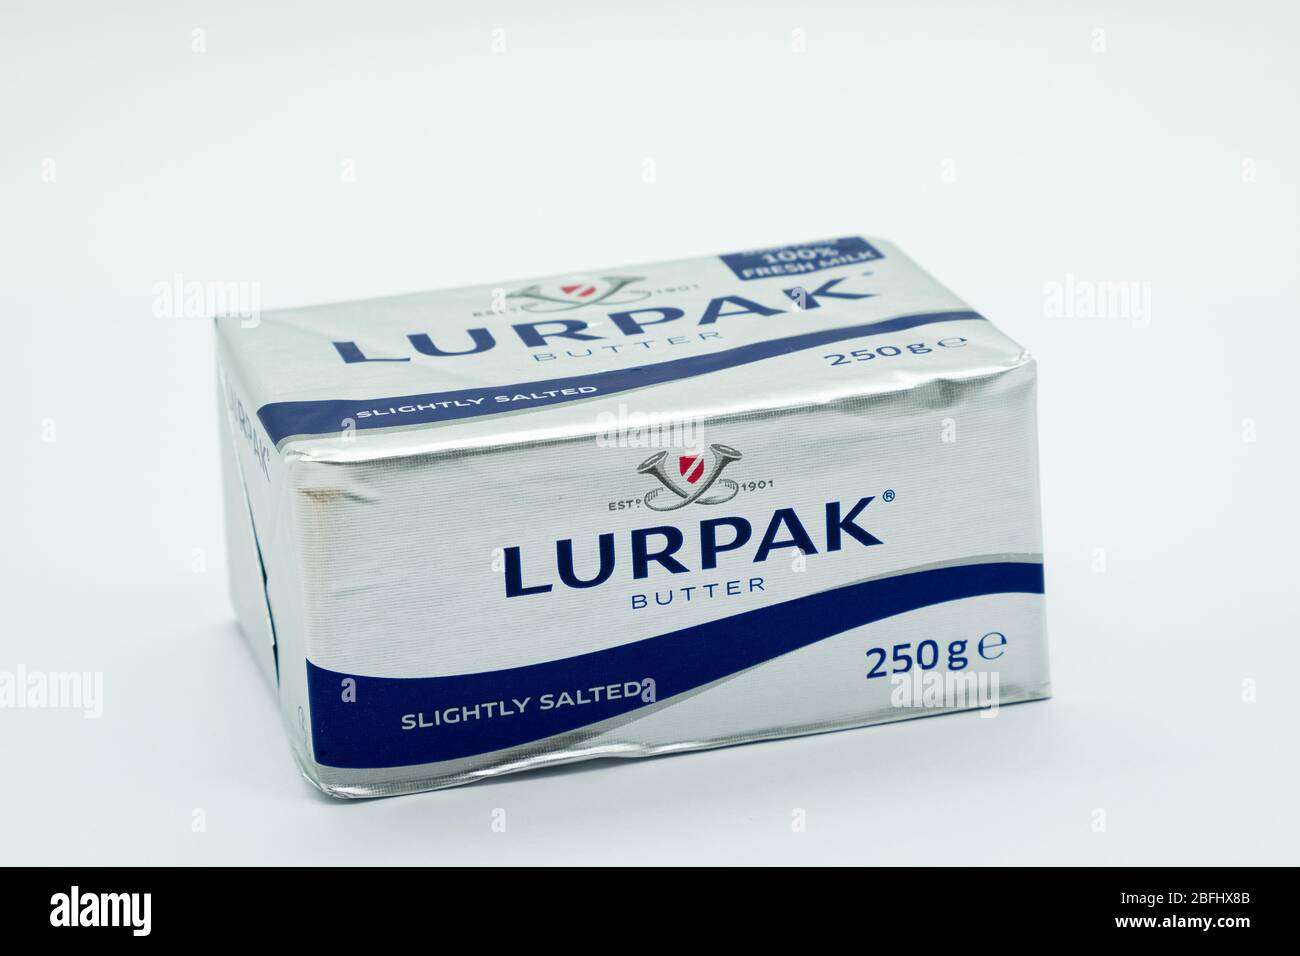 Irvine, Scotland, UK - April 18, 2020: A block of Lurpak branded slightly salted butter in recyclable wrapper made of foil and recyclable across most Stock Photo